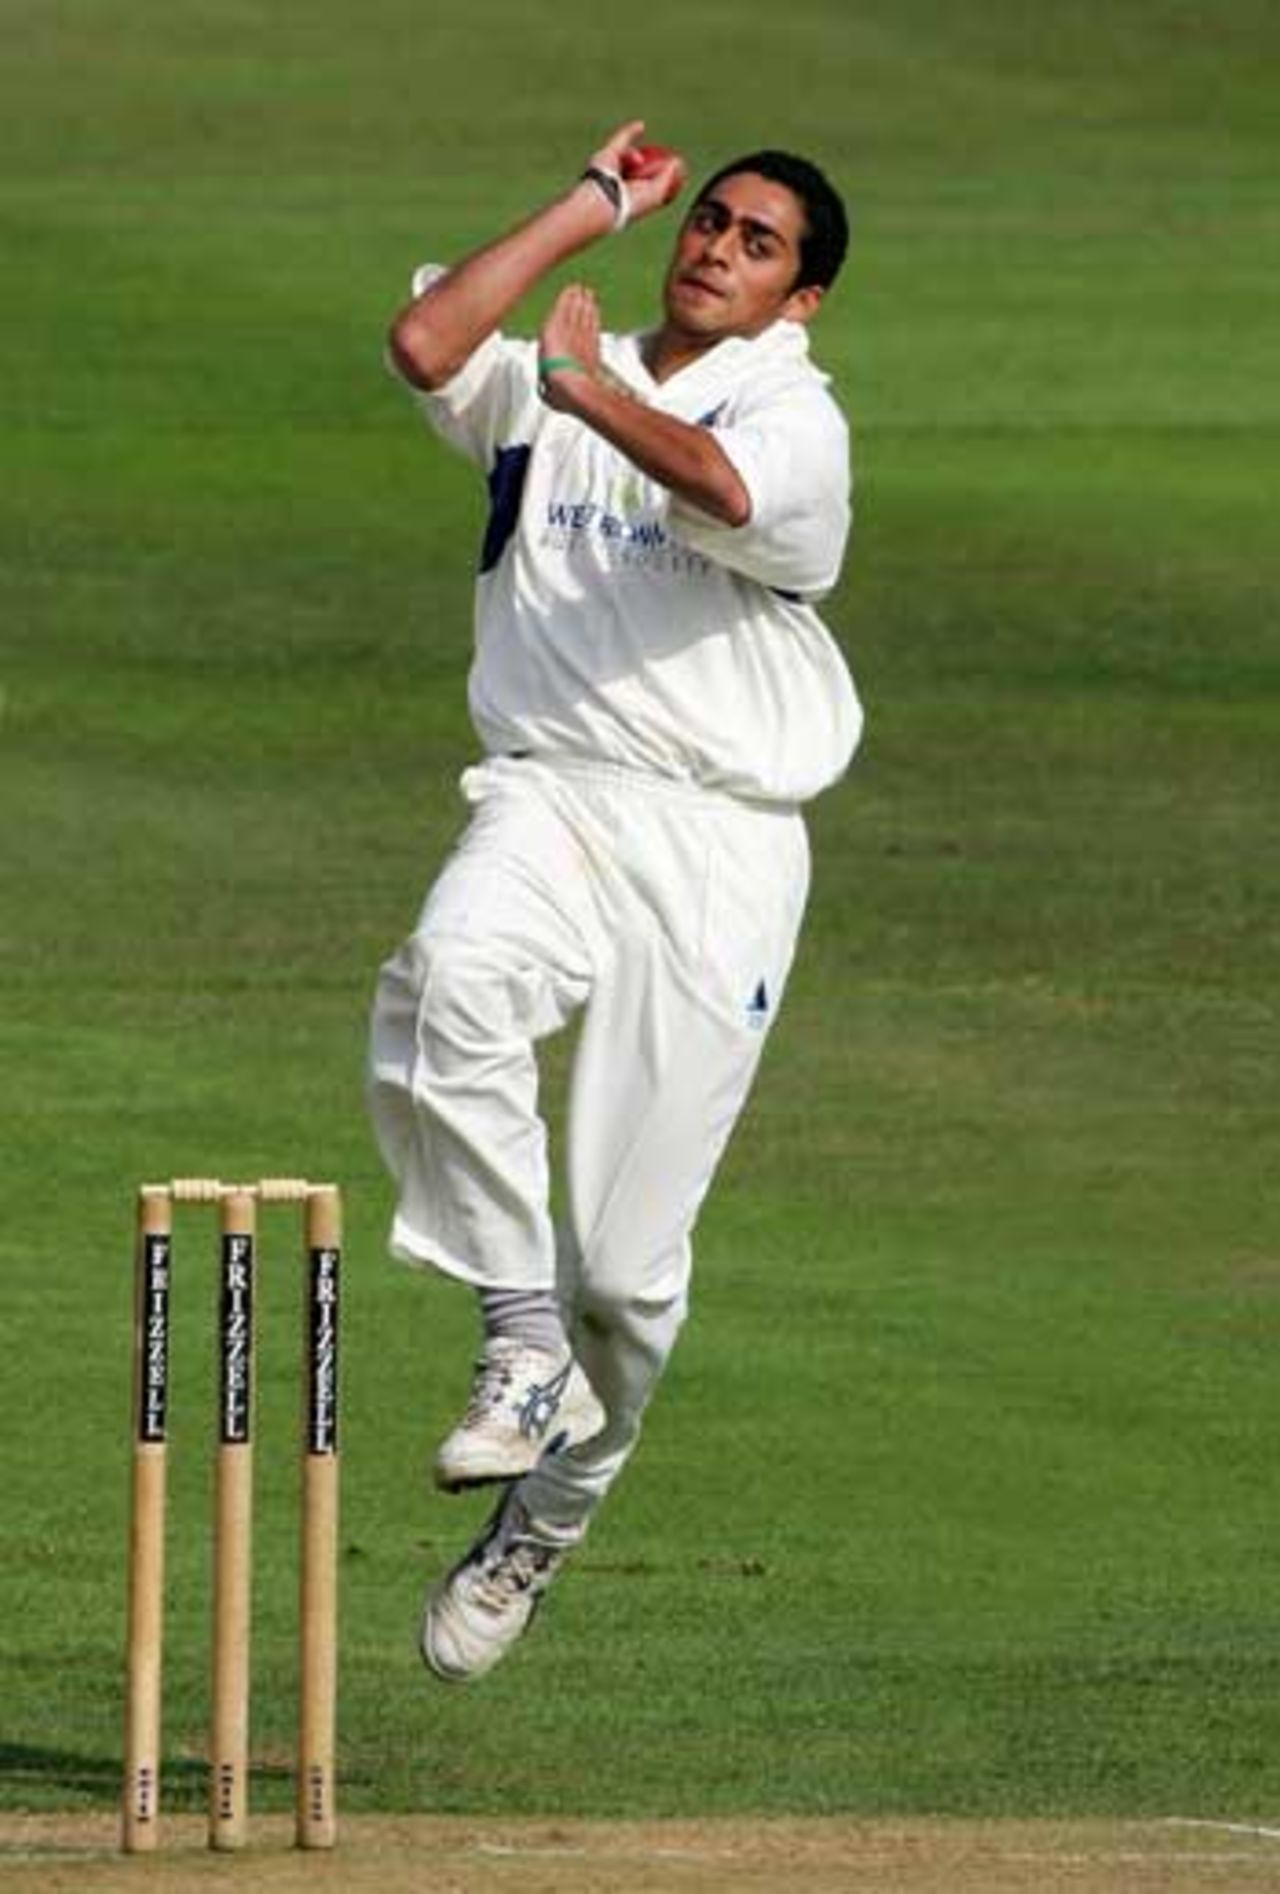 Naqaash Tahir approaches his delivery stride, Warwickshire v Gloucestershire, Edgbaston, September 22, 2005